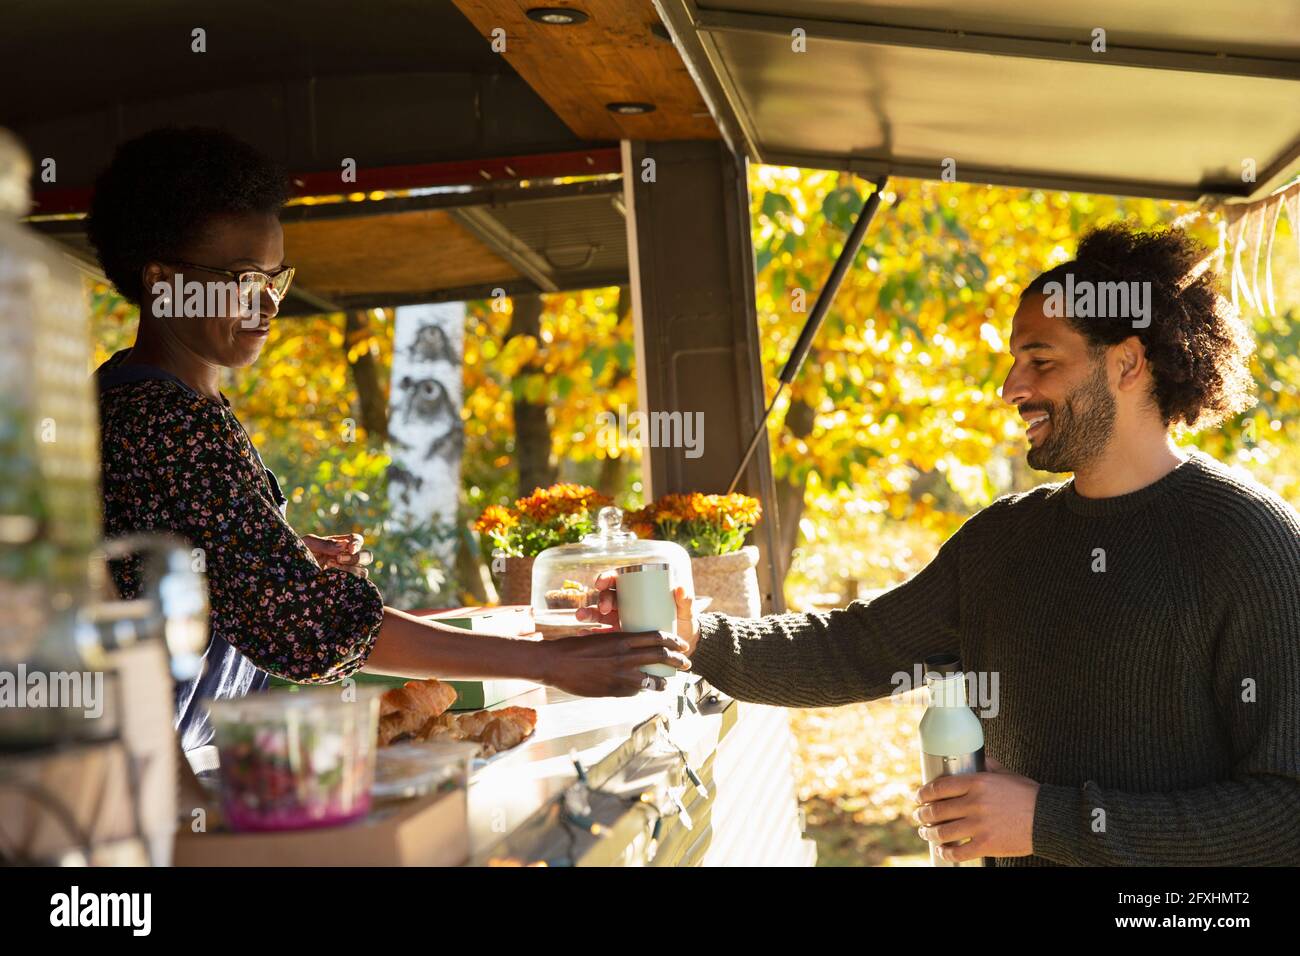 Food cart owner serving coffee to customer Stock Photo